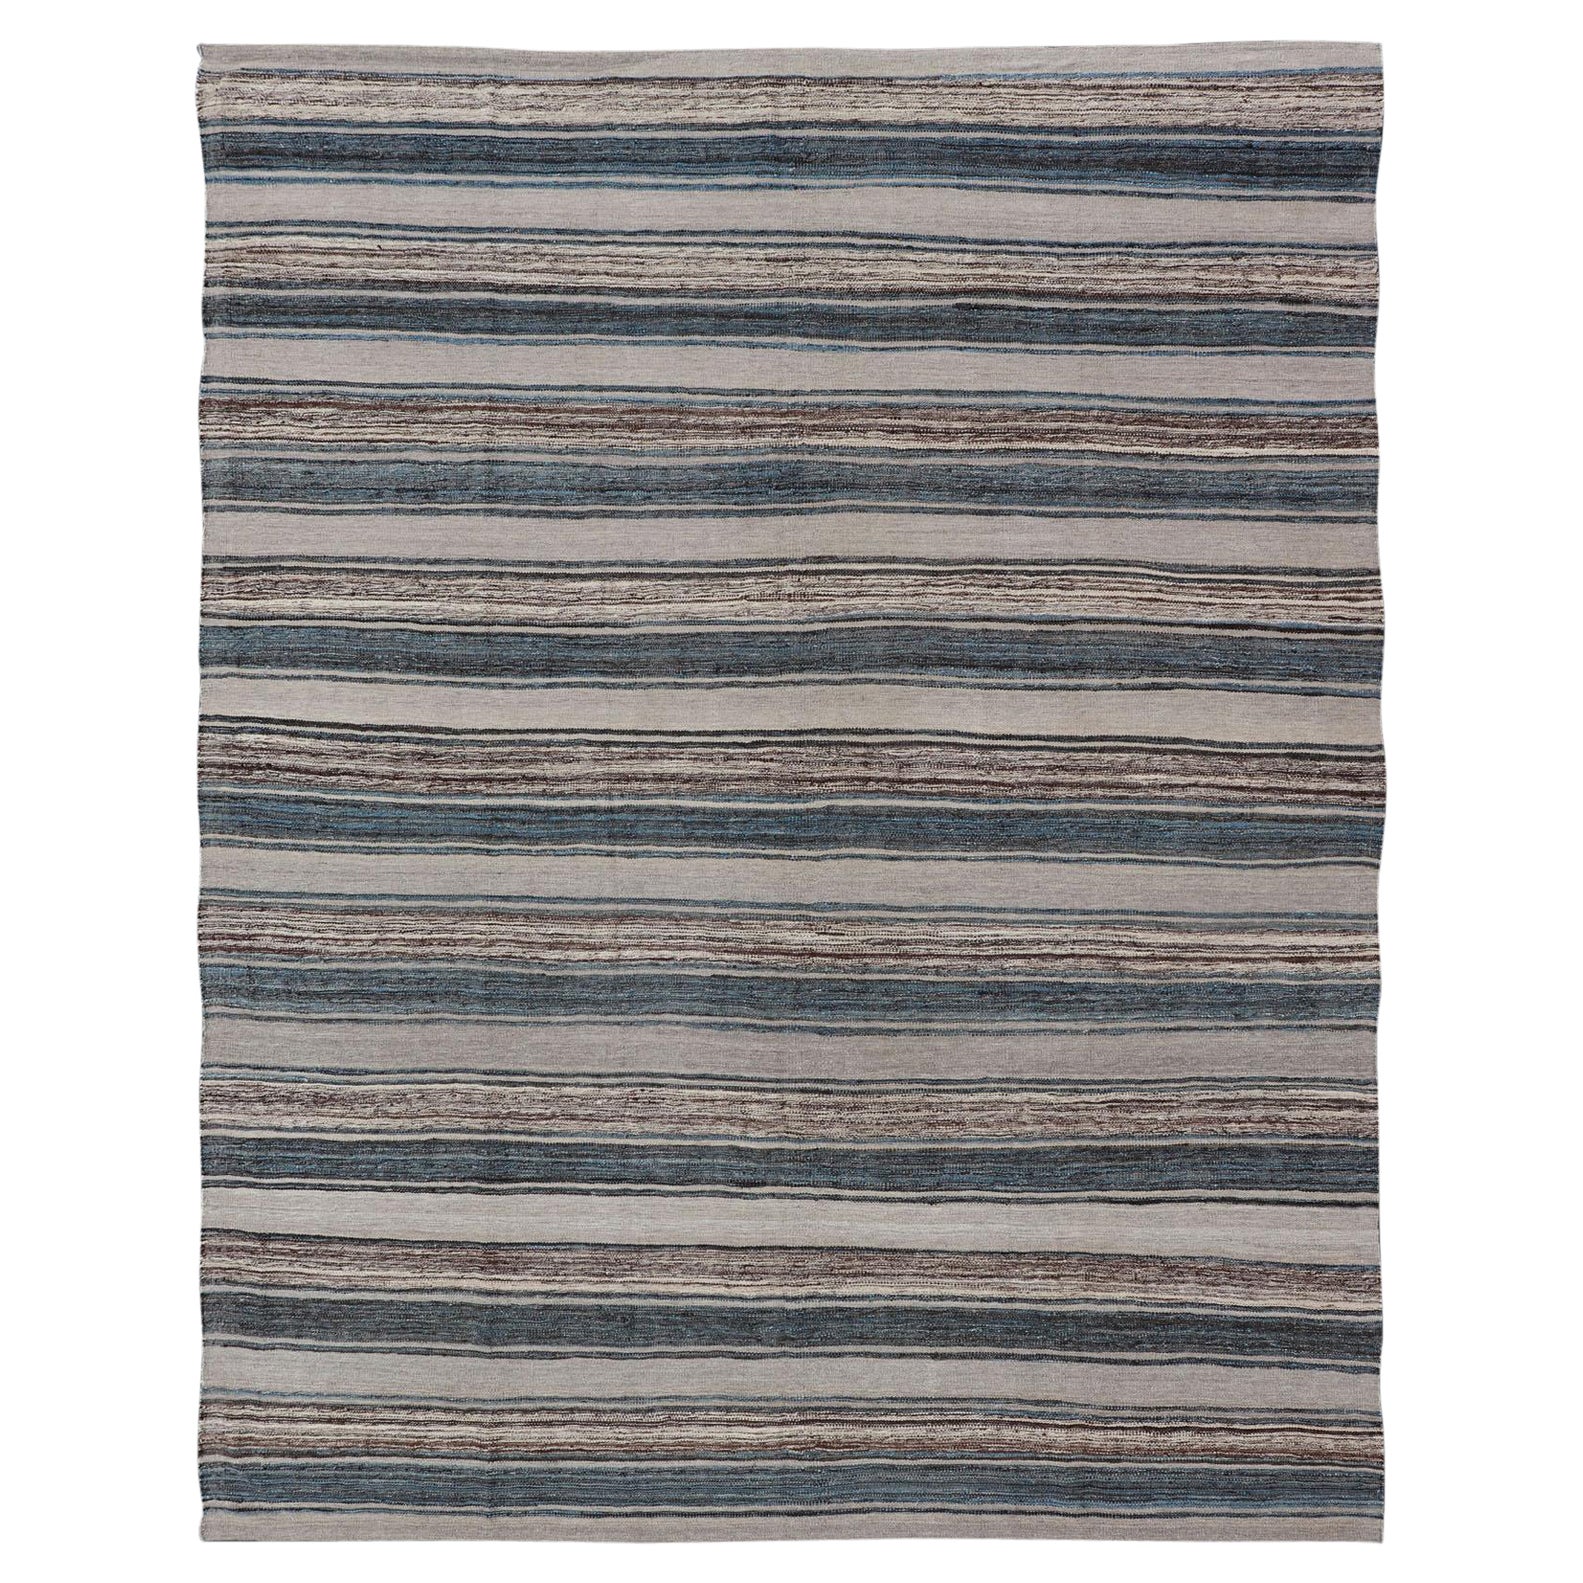 Versatile and Natural Brown, Cream, and Blue Striped Flat-Weave Kilim For Sale